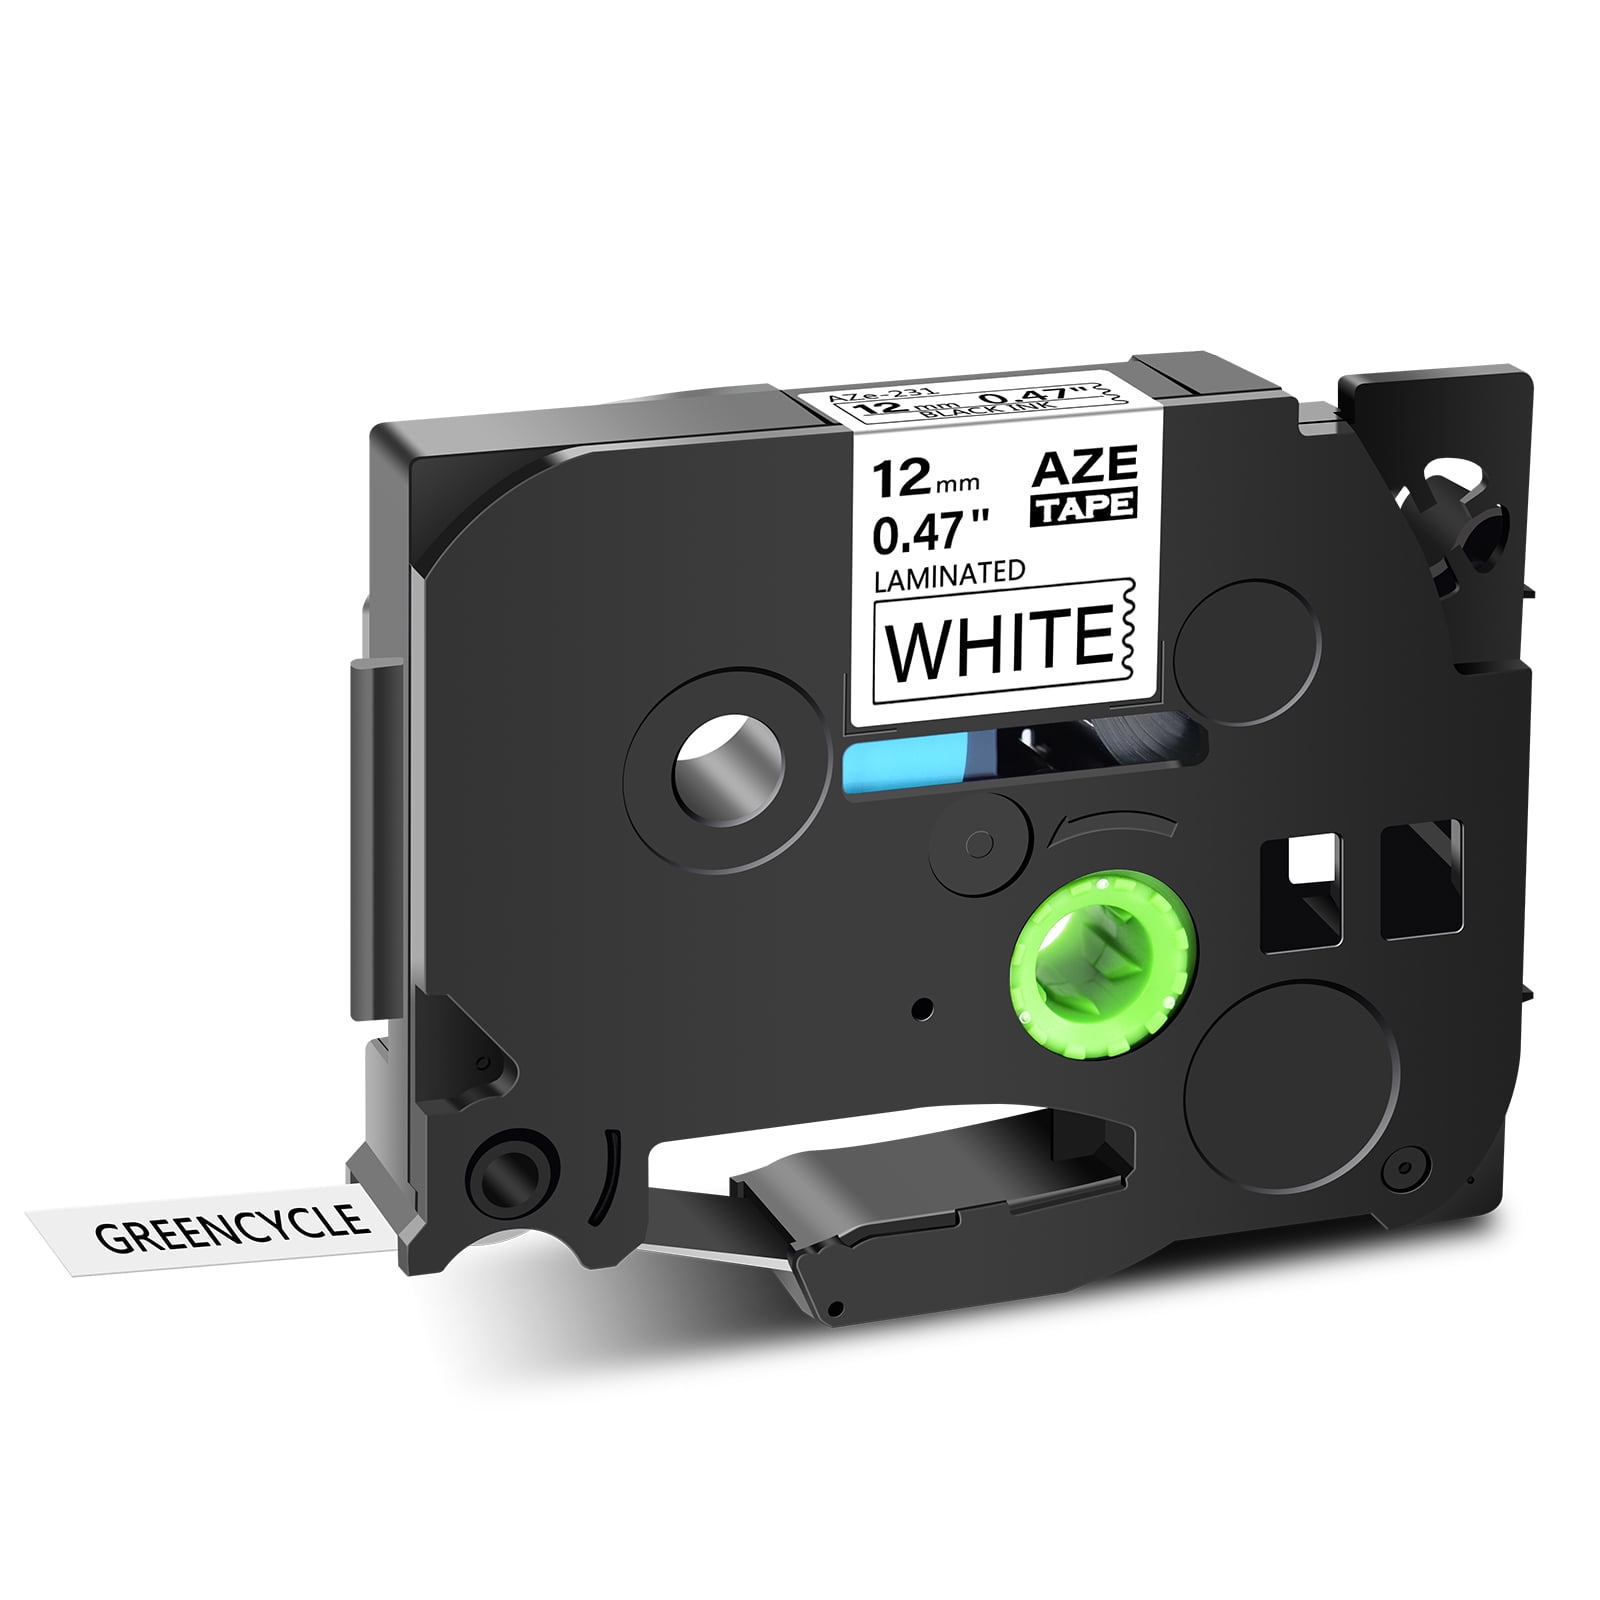 50PK TZ-231 12mm White Label Tape Compatible for Brother P-Touch D450 D600 D400